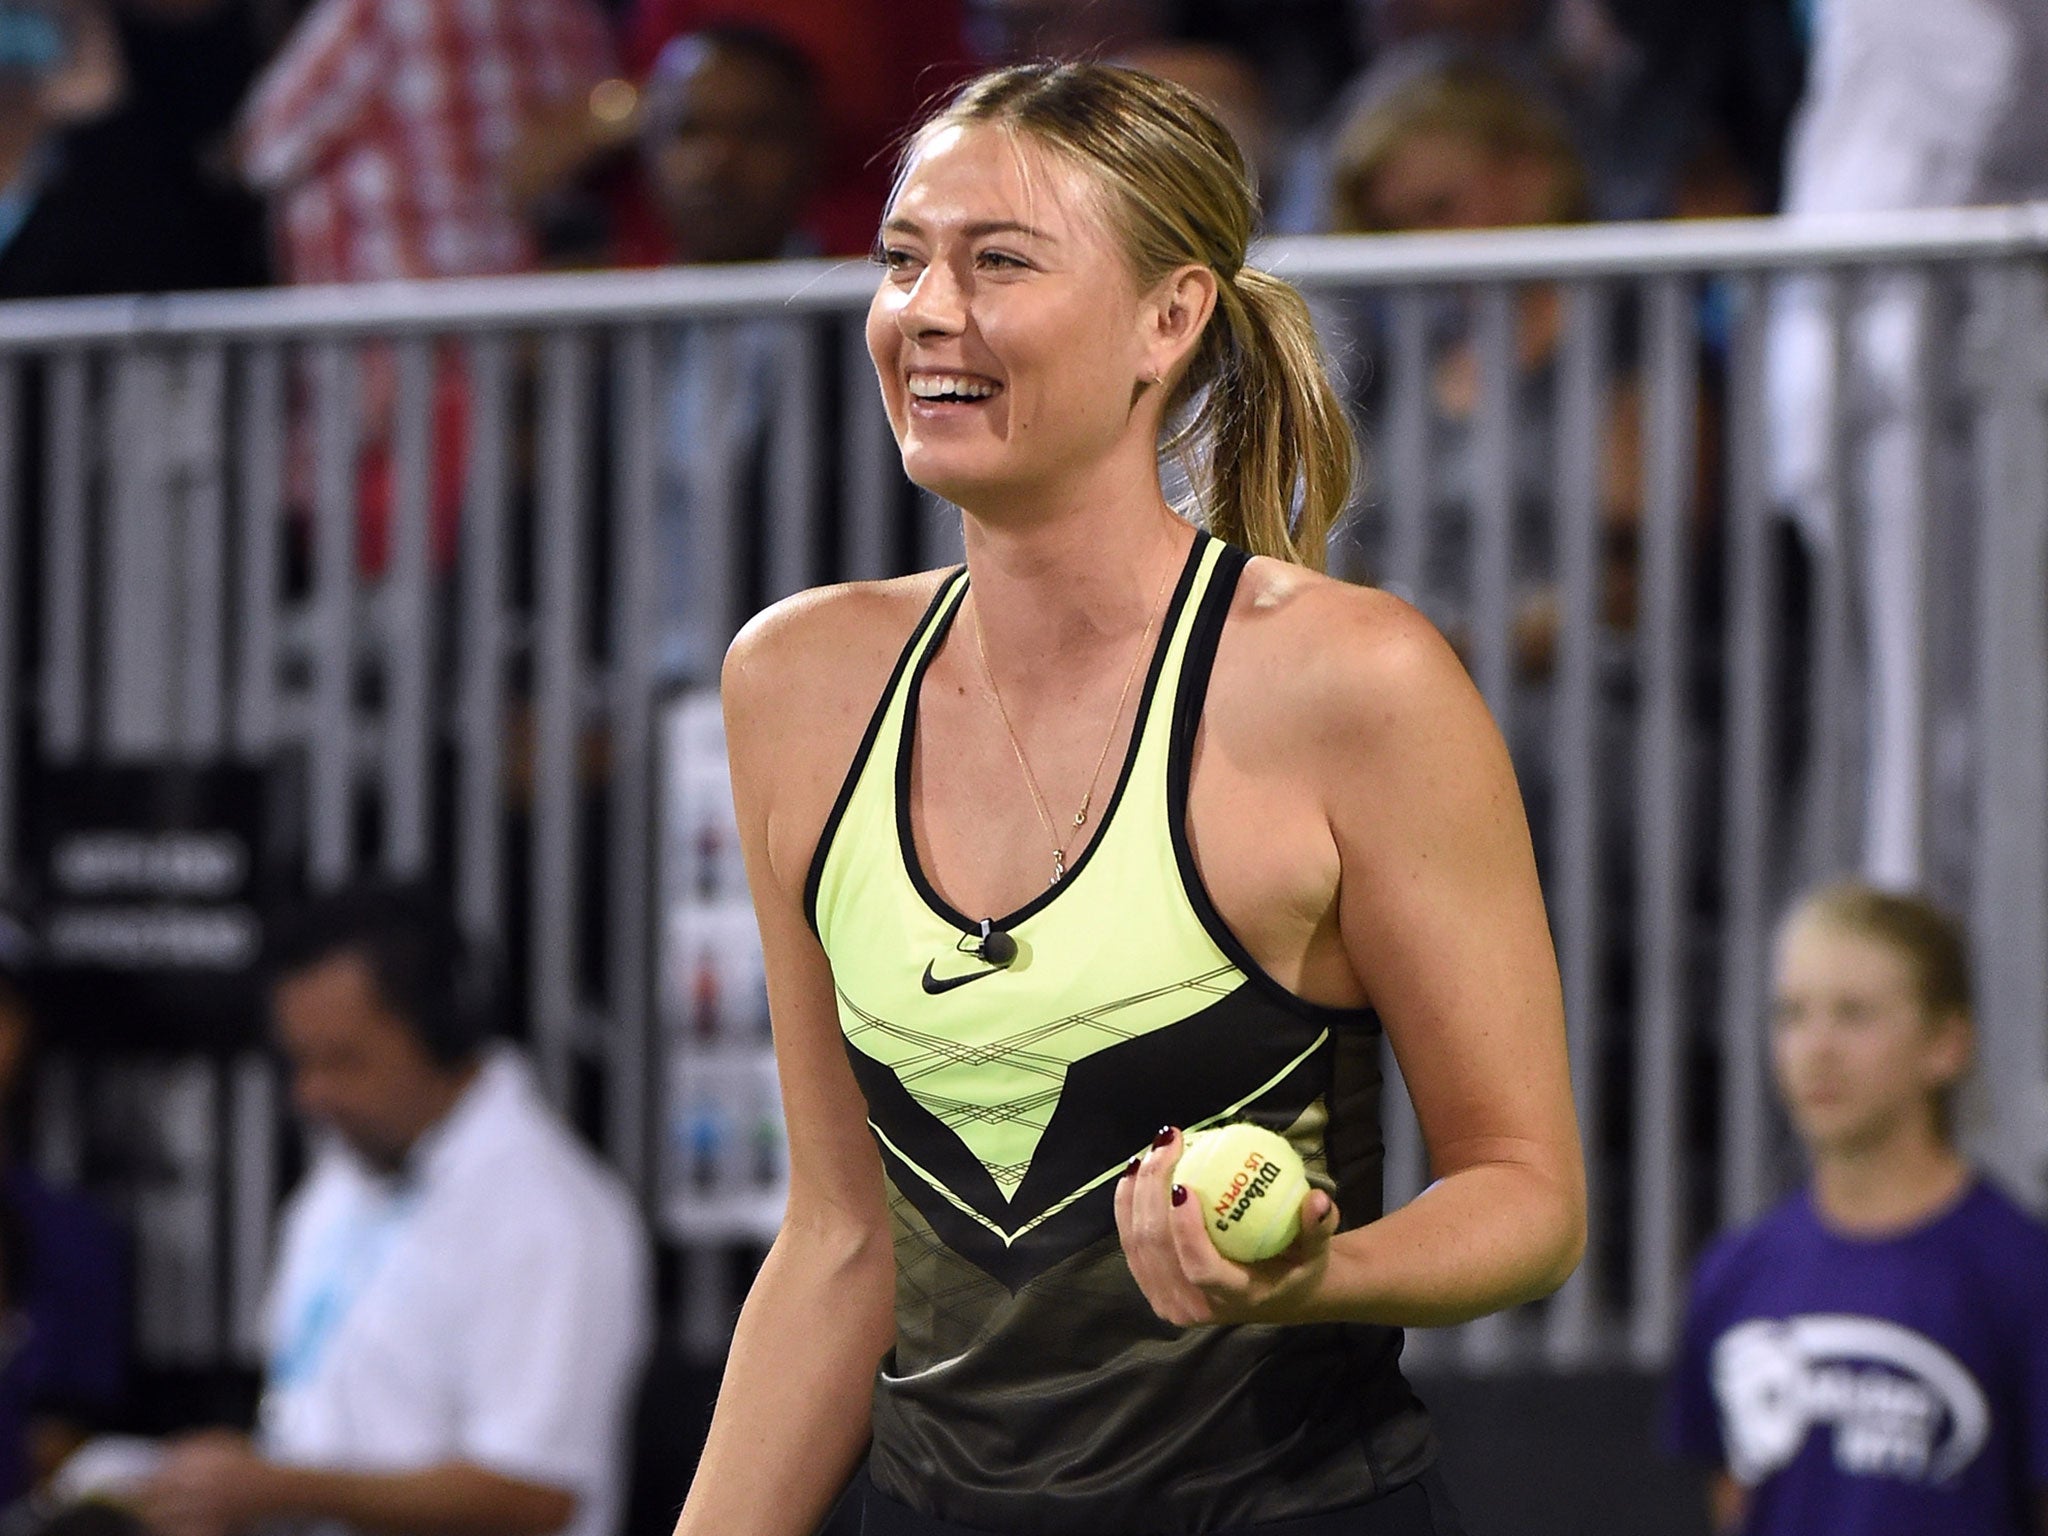 Maria Sharapova has outlined her plans to return to professional tennis in April after serving a drugs ban